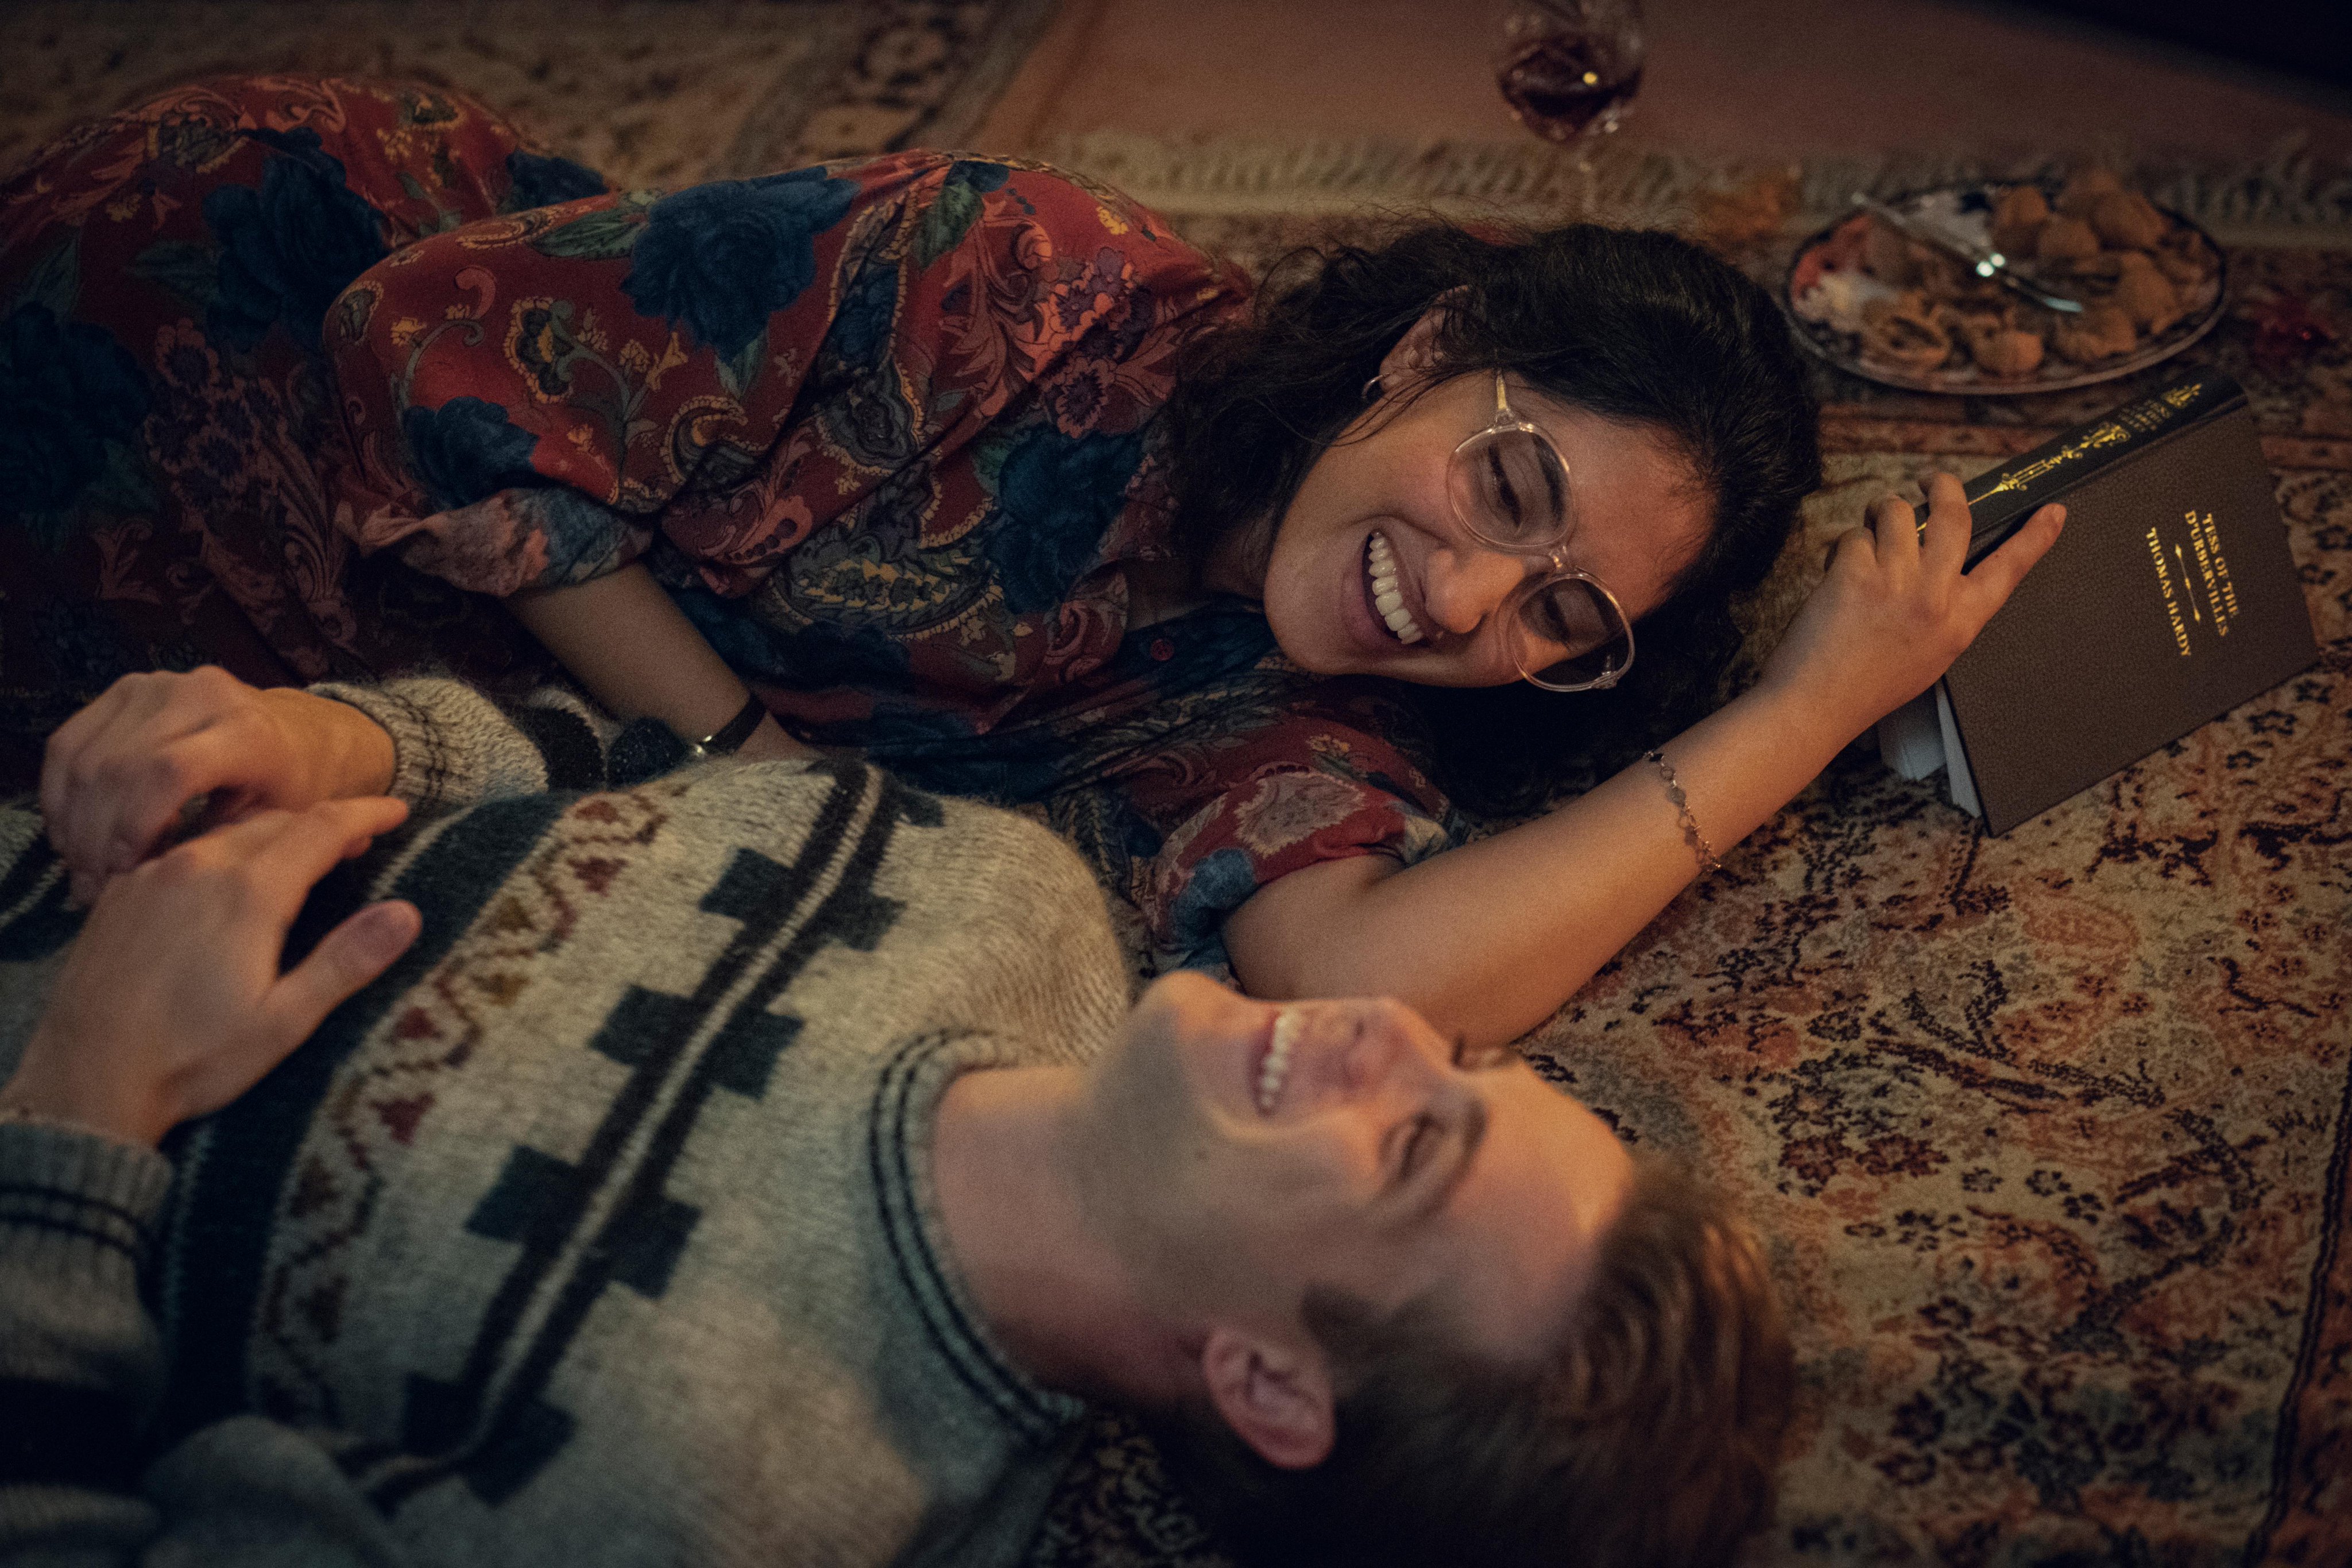 The new Netflix series stars Ambika Mod as Emma, known for her portrayal of Shruti in This is Going to Hurt, and Leo Woodall as Dexter, who recently starred in The White Lotus.